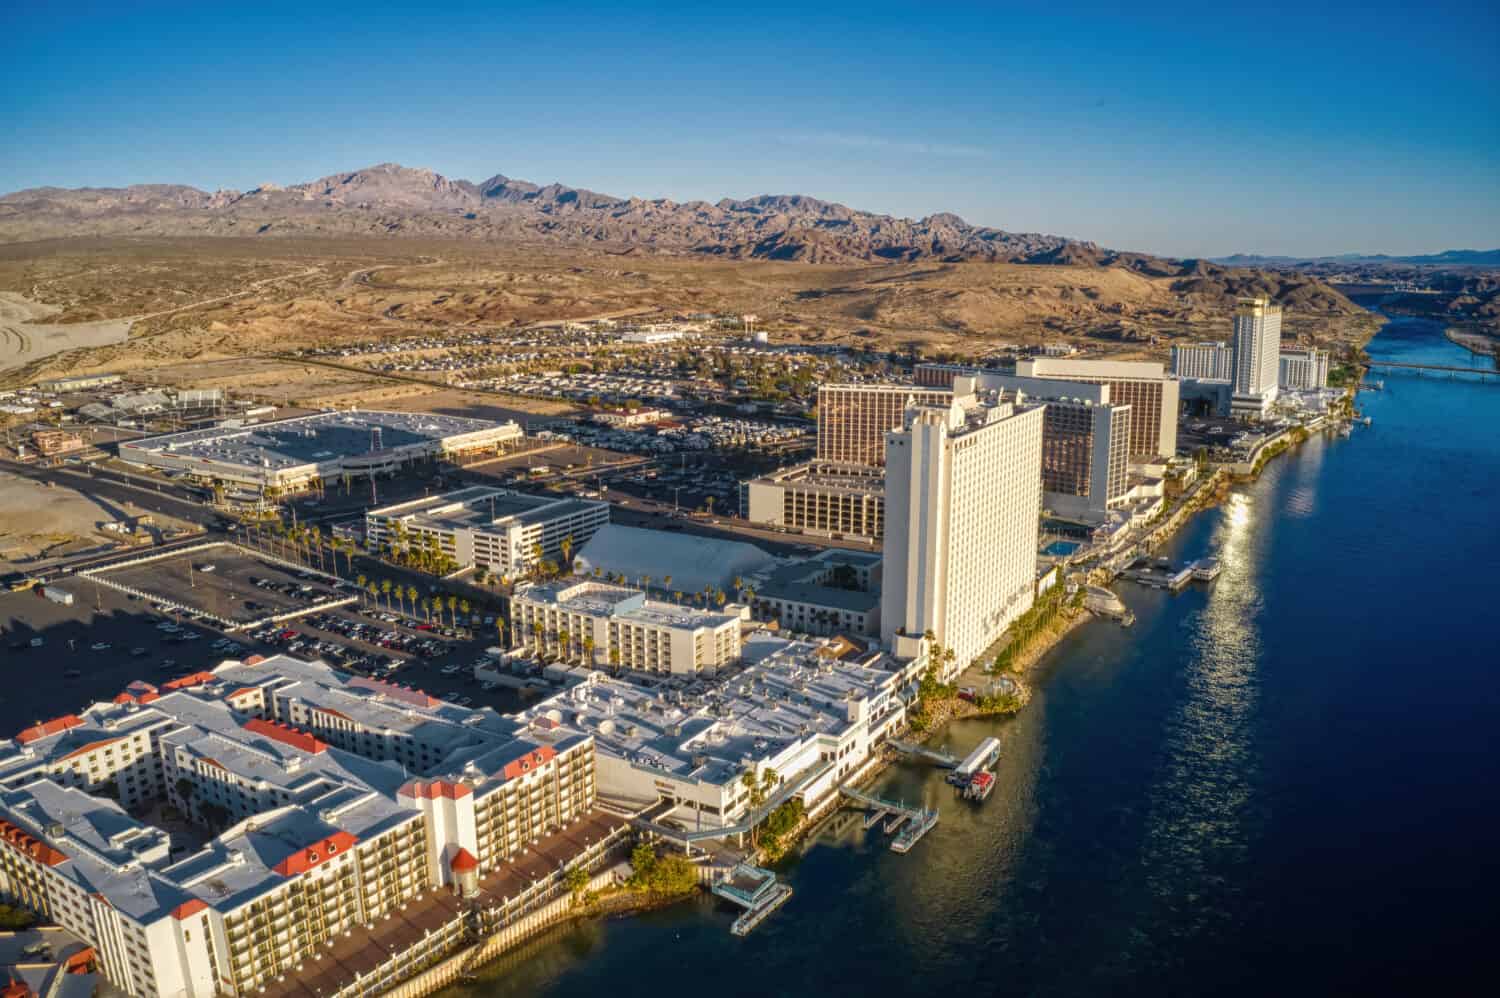 Aerial View of Laughlin, Nevada on the Colorado River